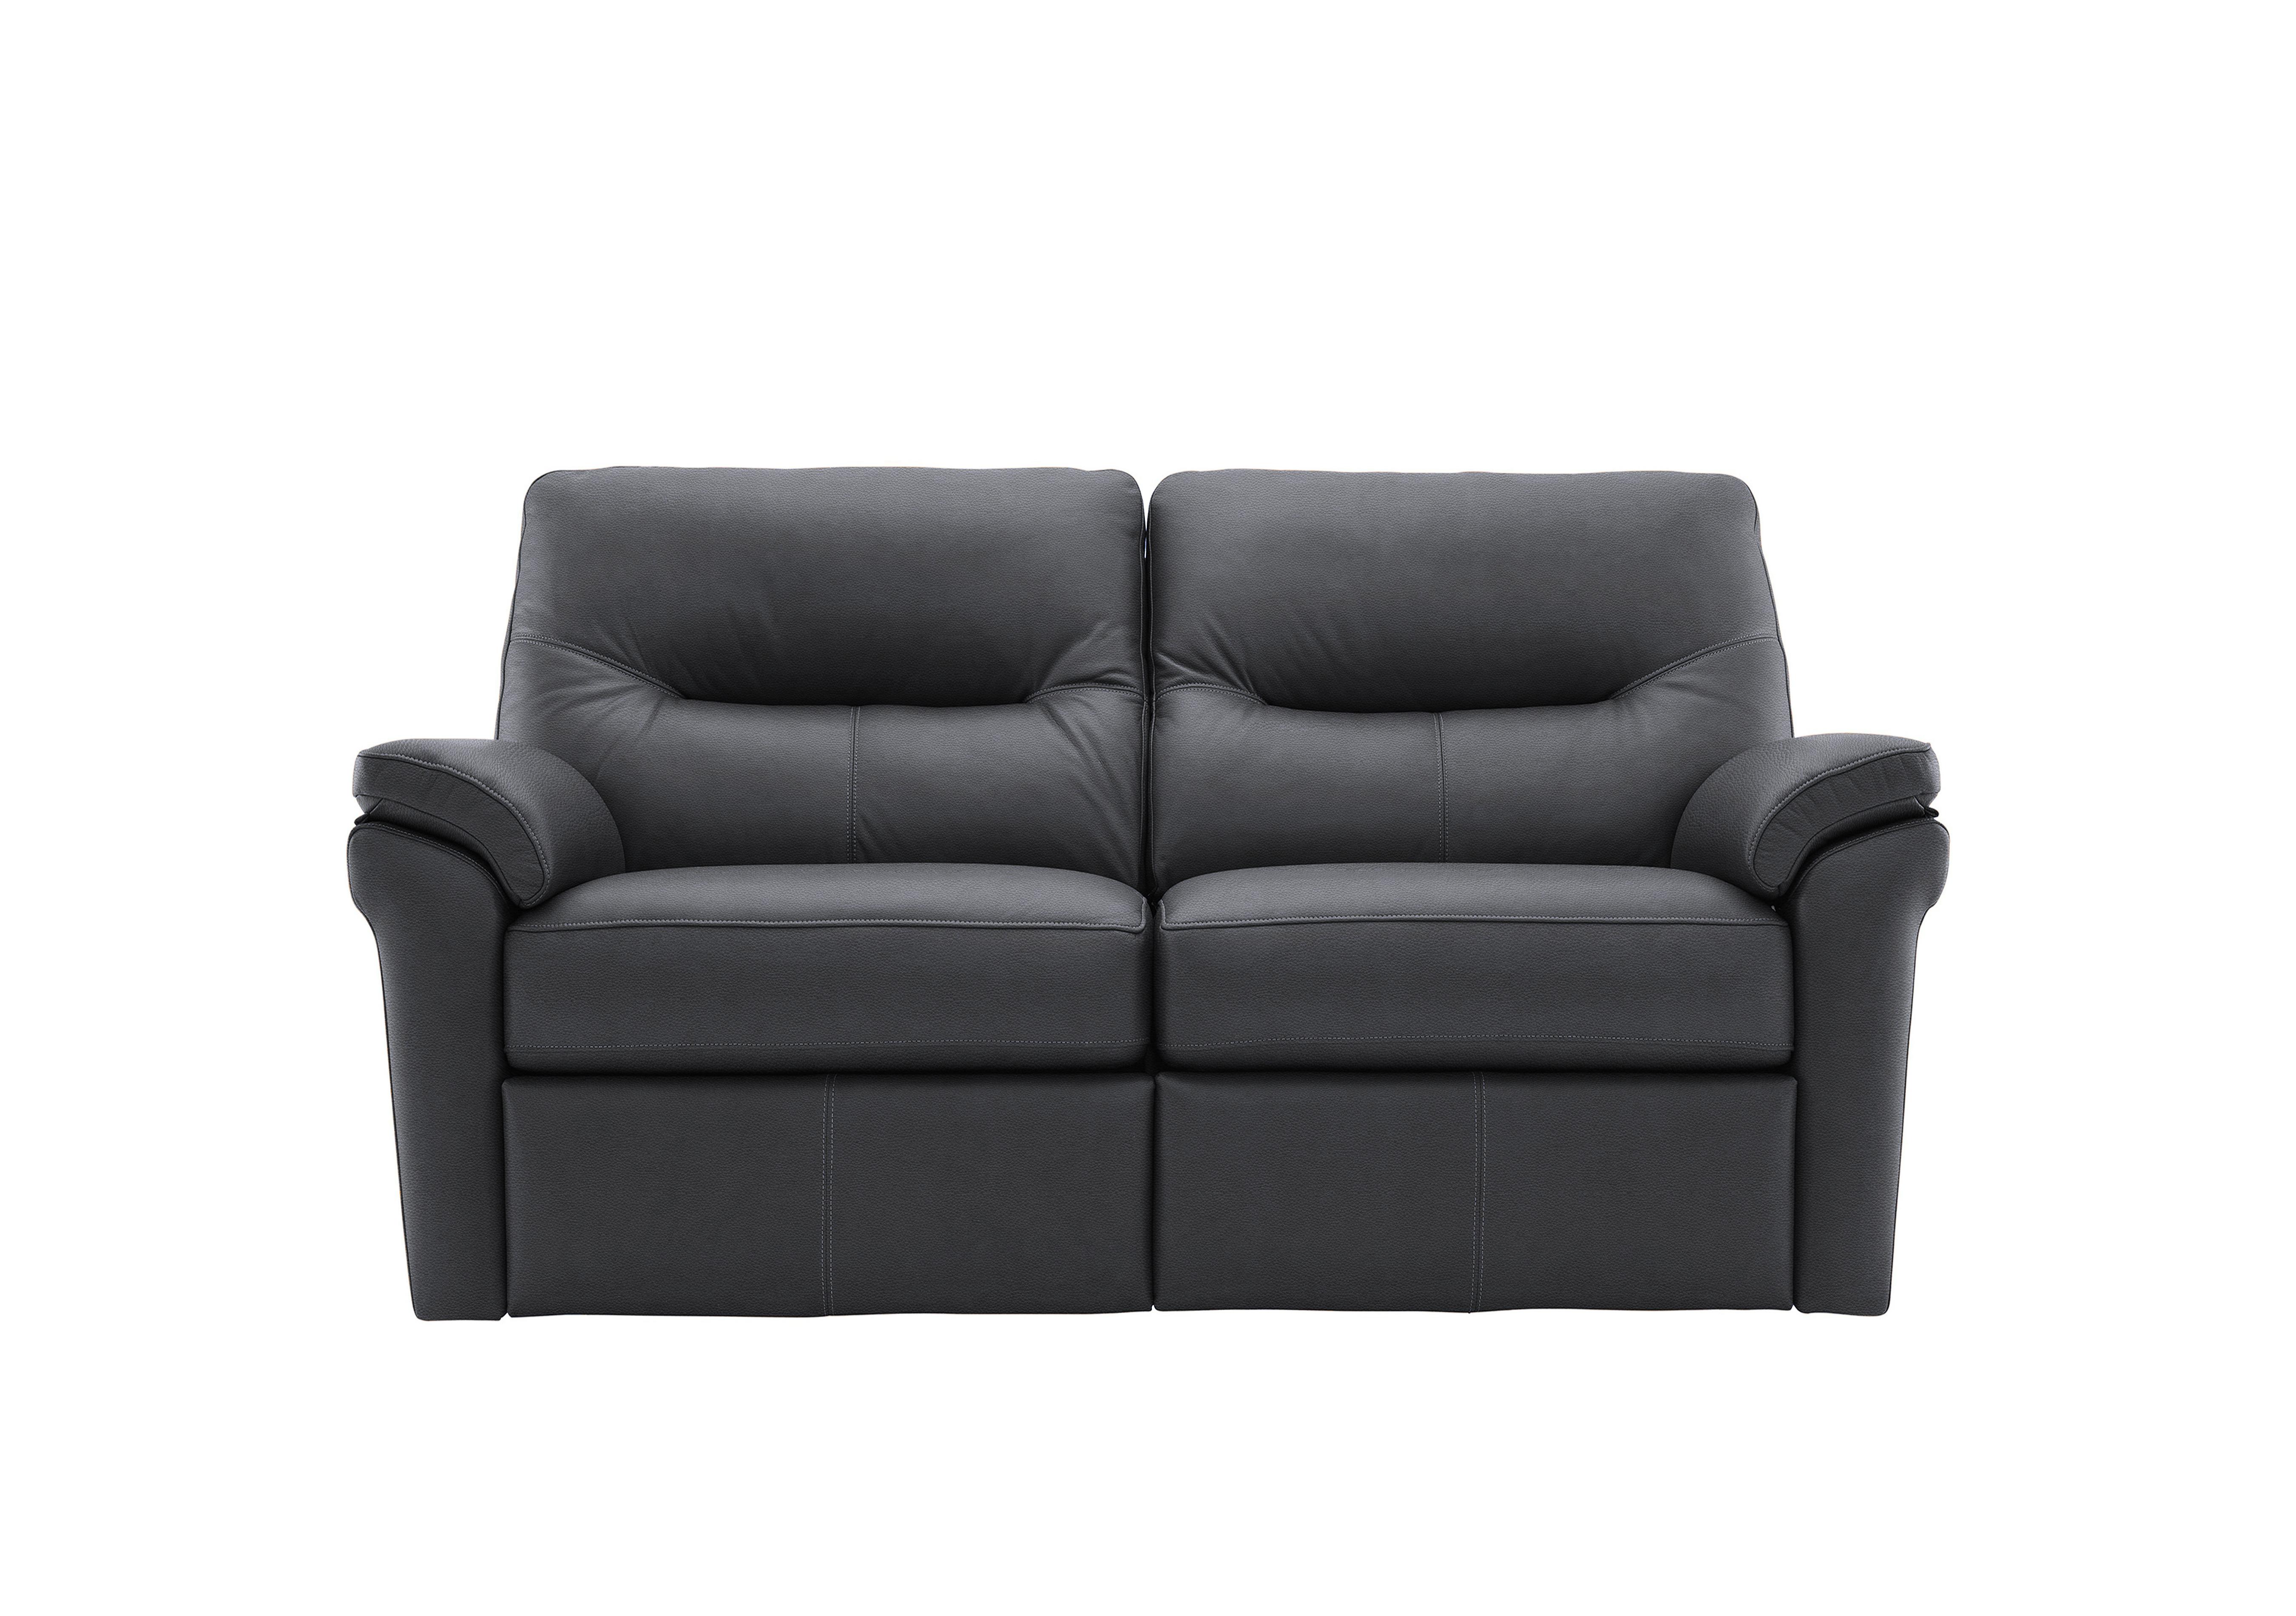 Seattle 3 Seater Leather Power Recliner Sofa with Power Lumbar in L852 Cambridge Petrol Blue on Furniture Village